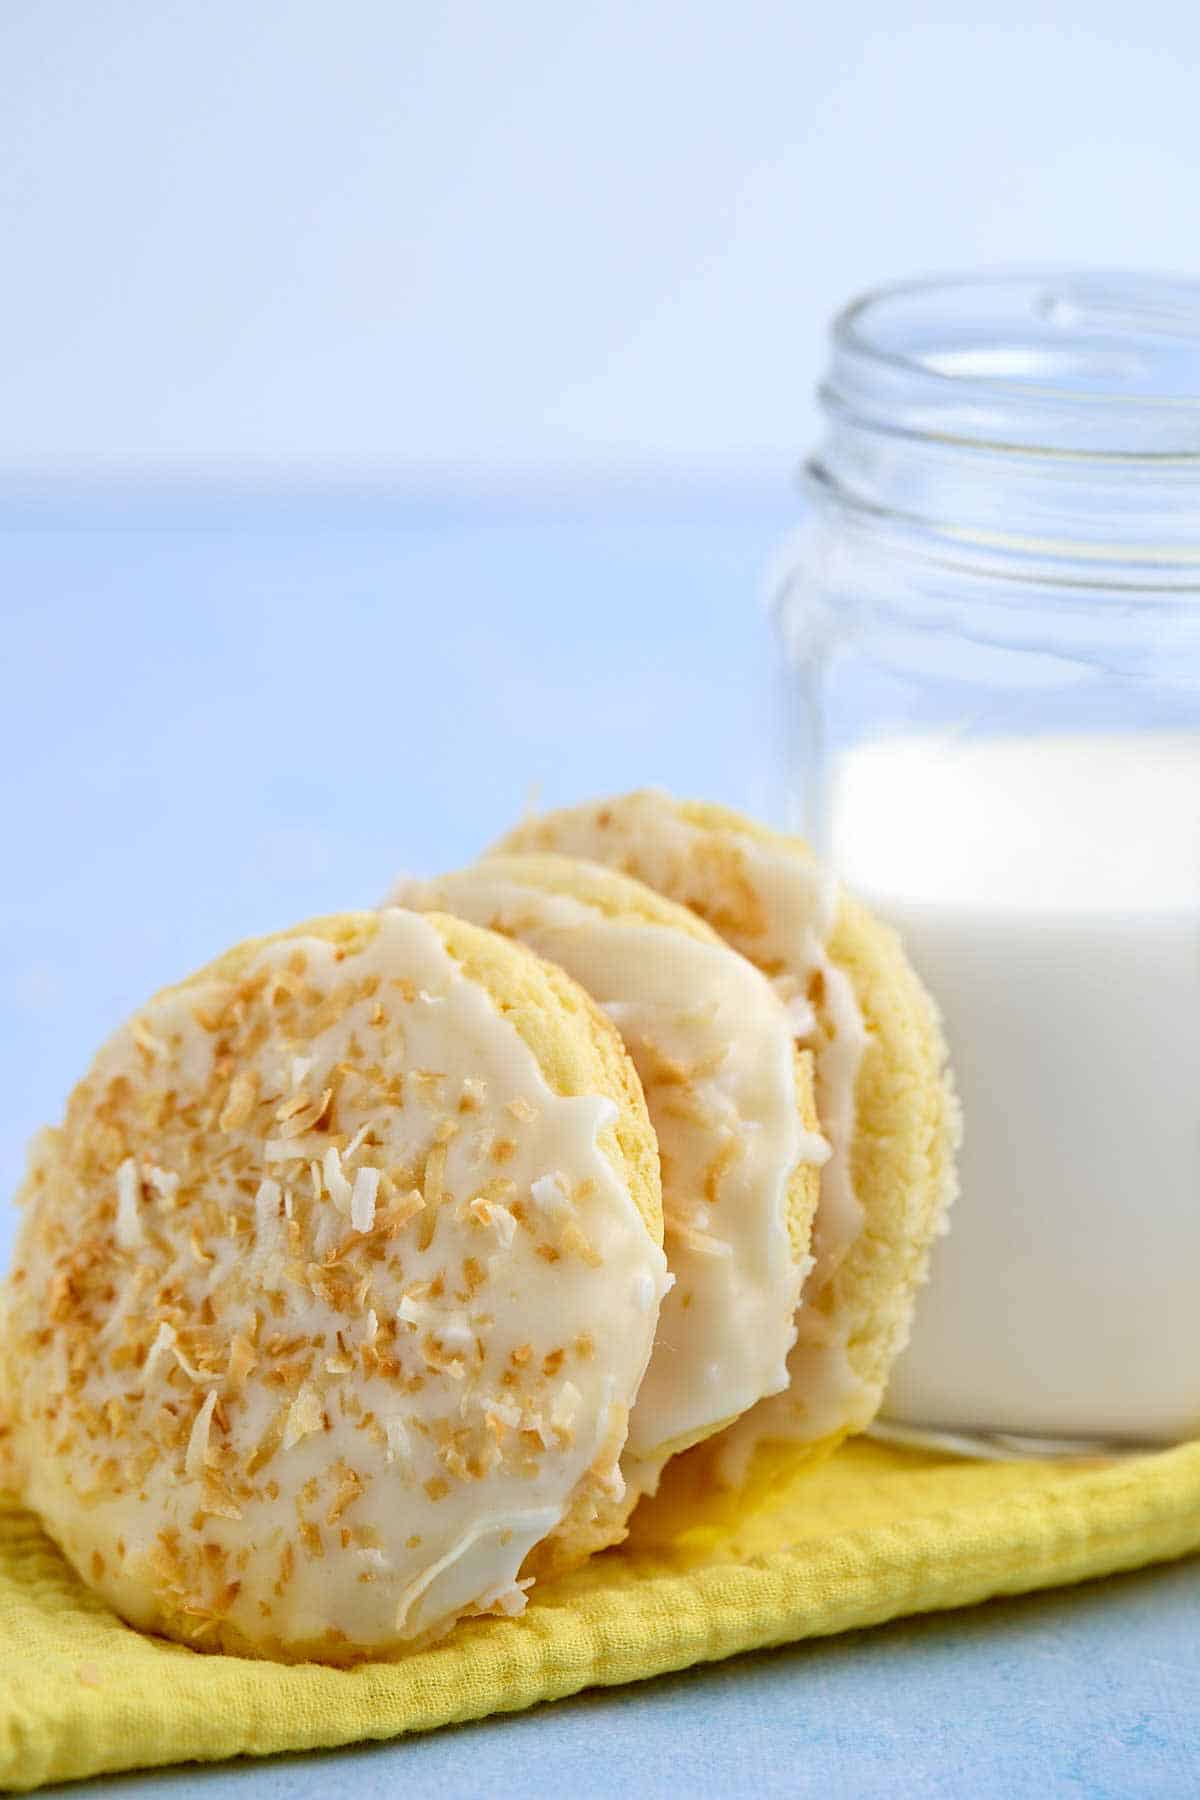 Three pineapple cookies leaning against a glass of milk.